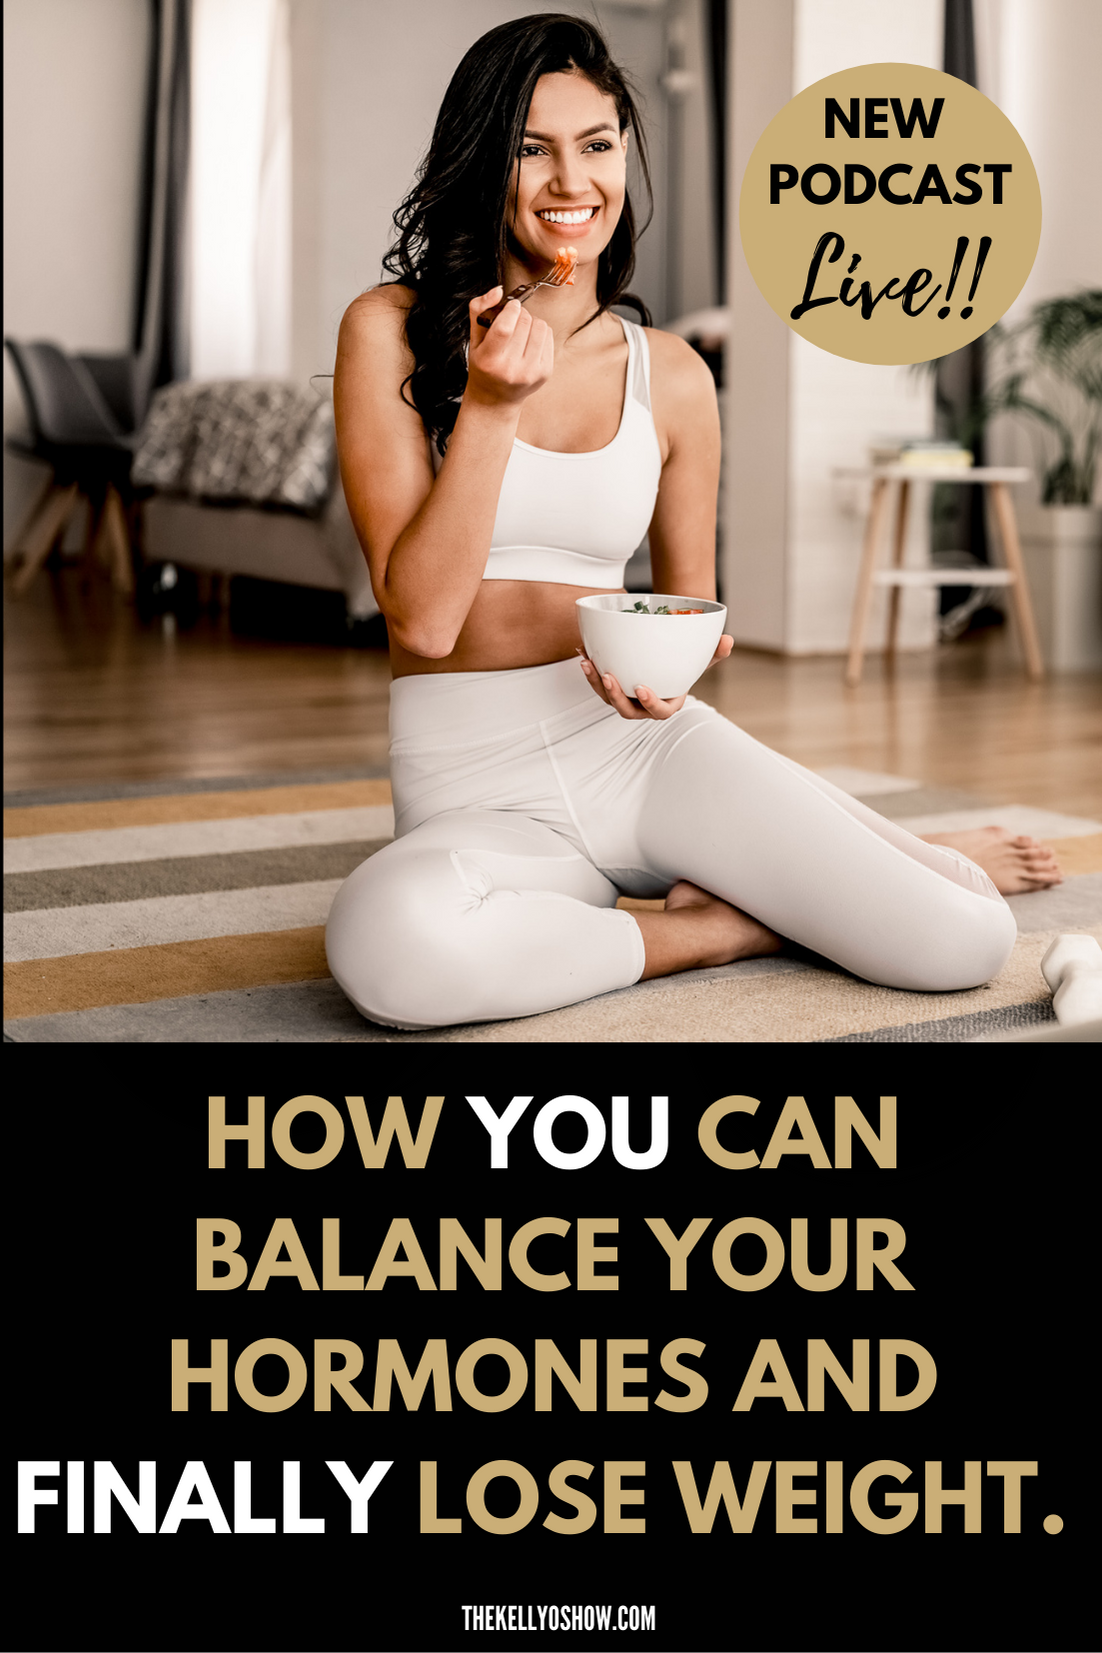 How to balance hormones and lose weight